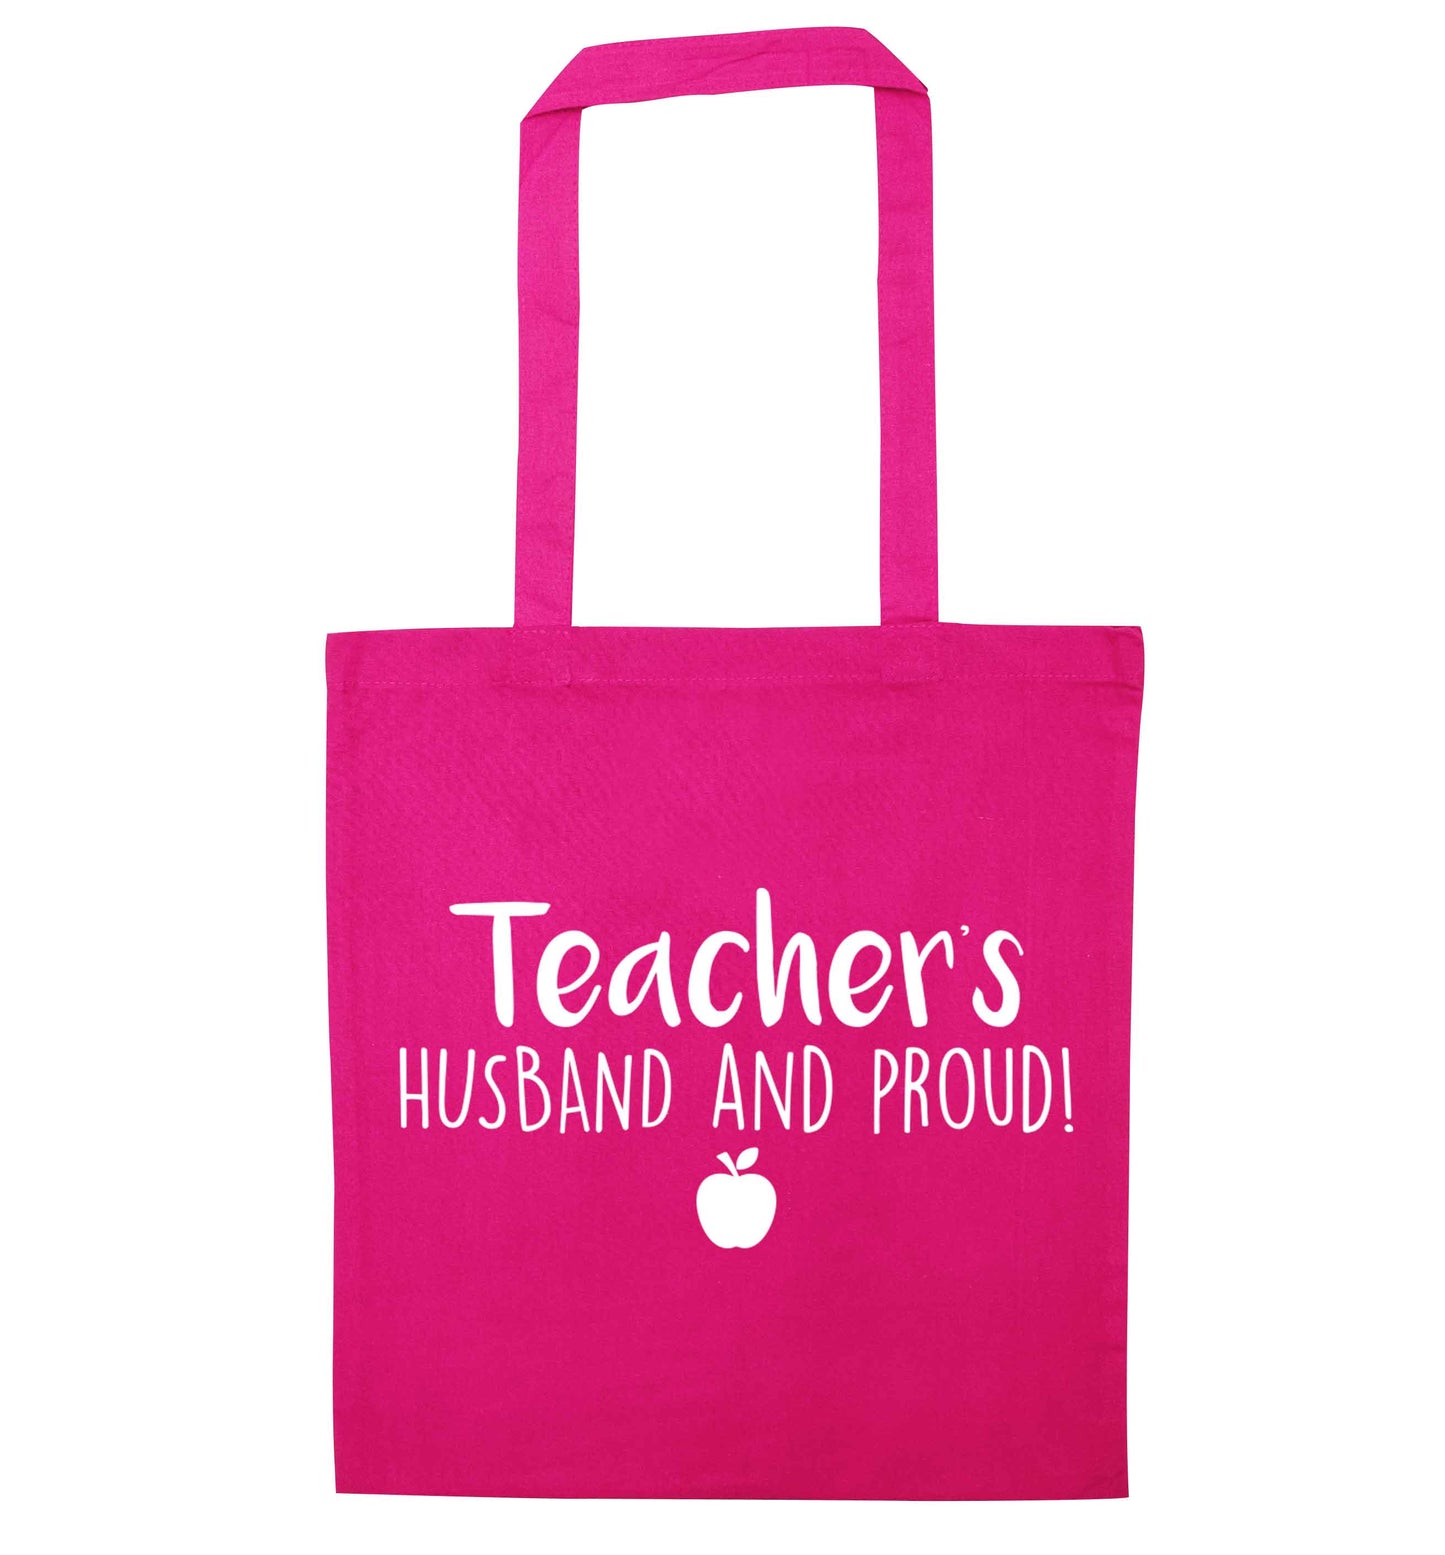 Teachers husband and proud pink tote bag